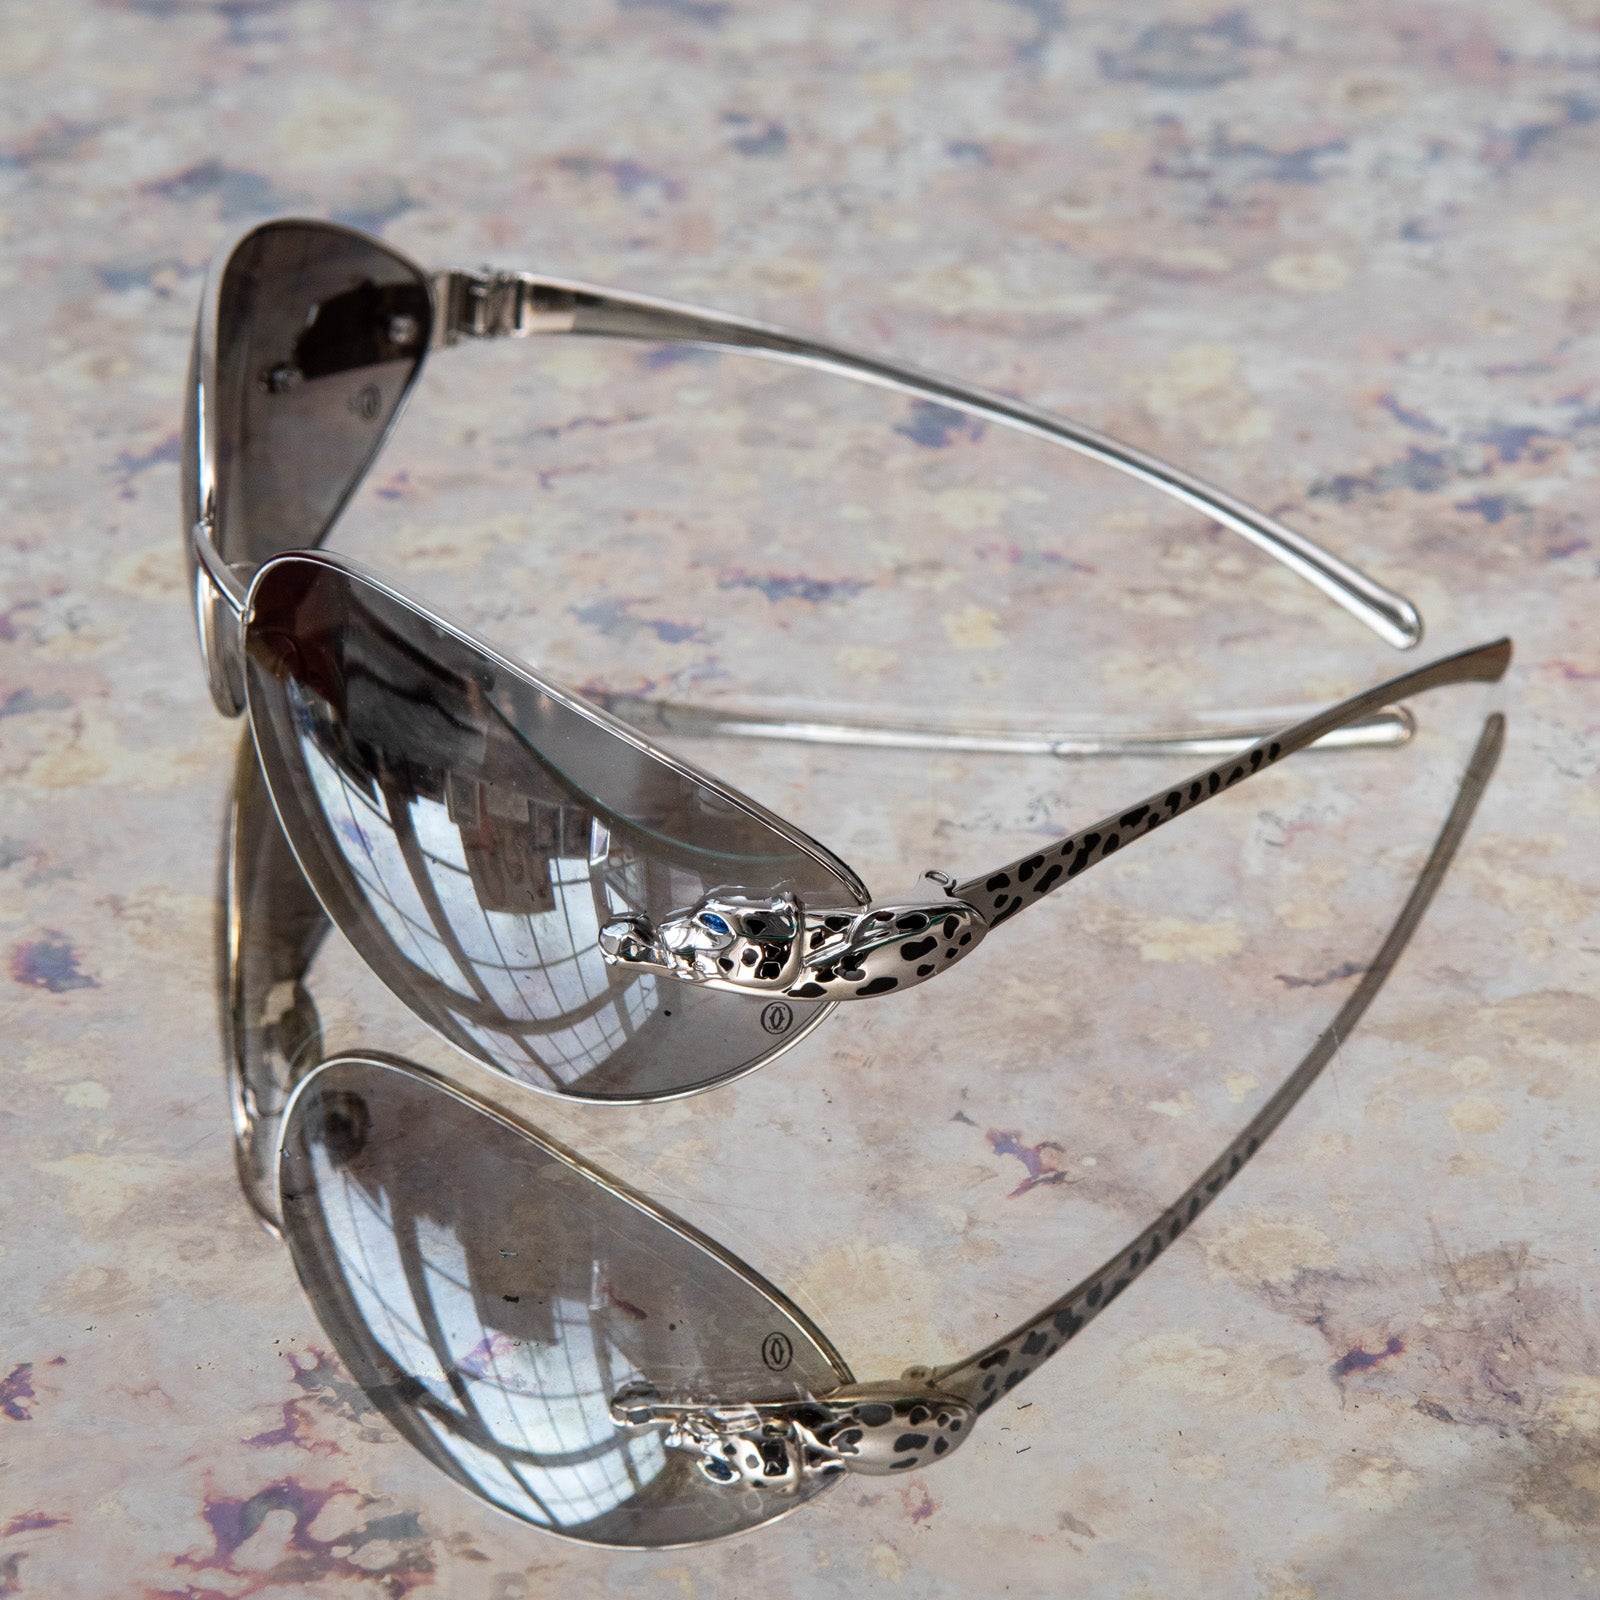 Cartier Vintage Limited Edition Panthere de Aviator Sunglasses - Image 5 of 8